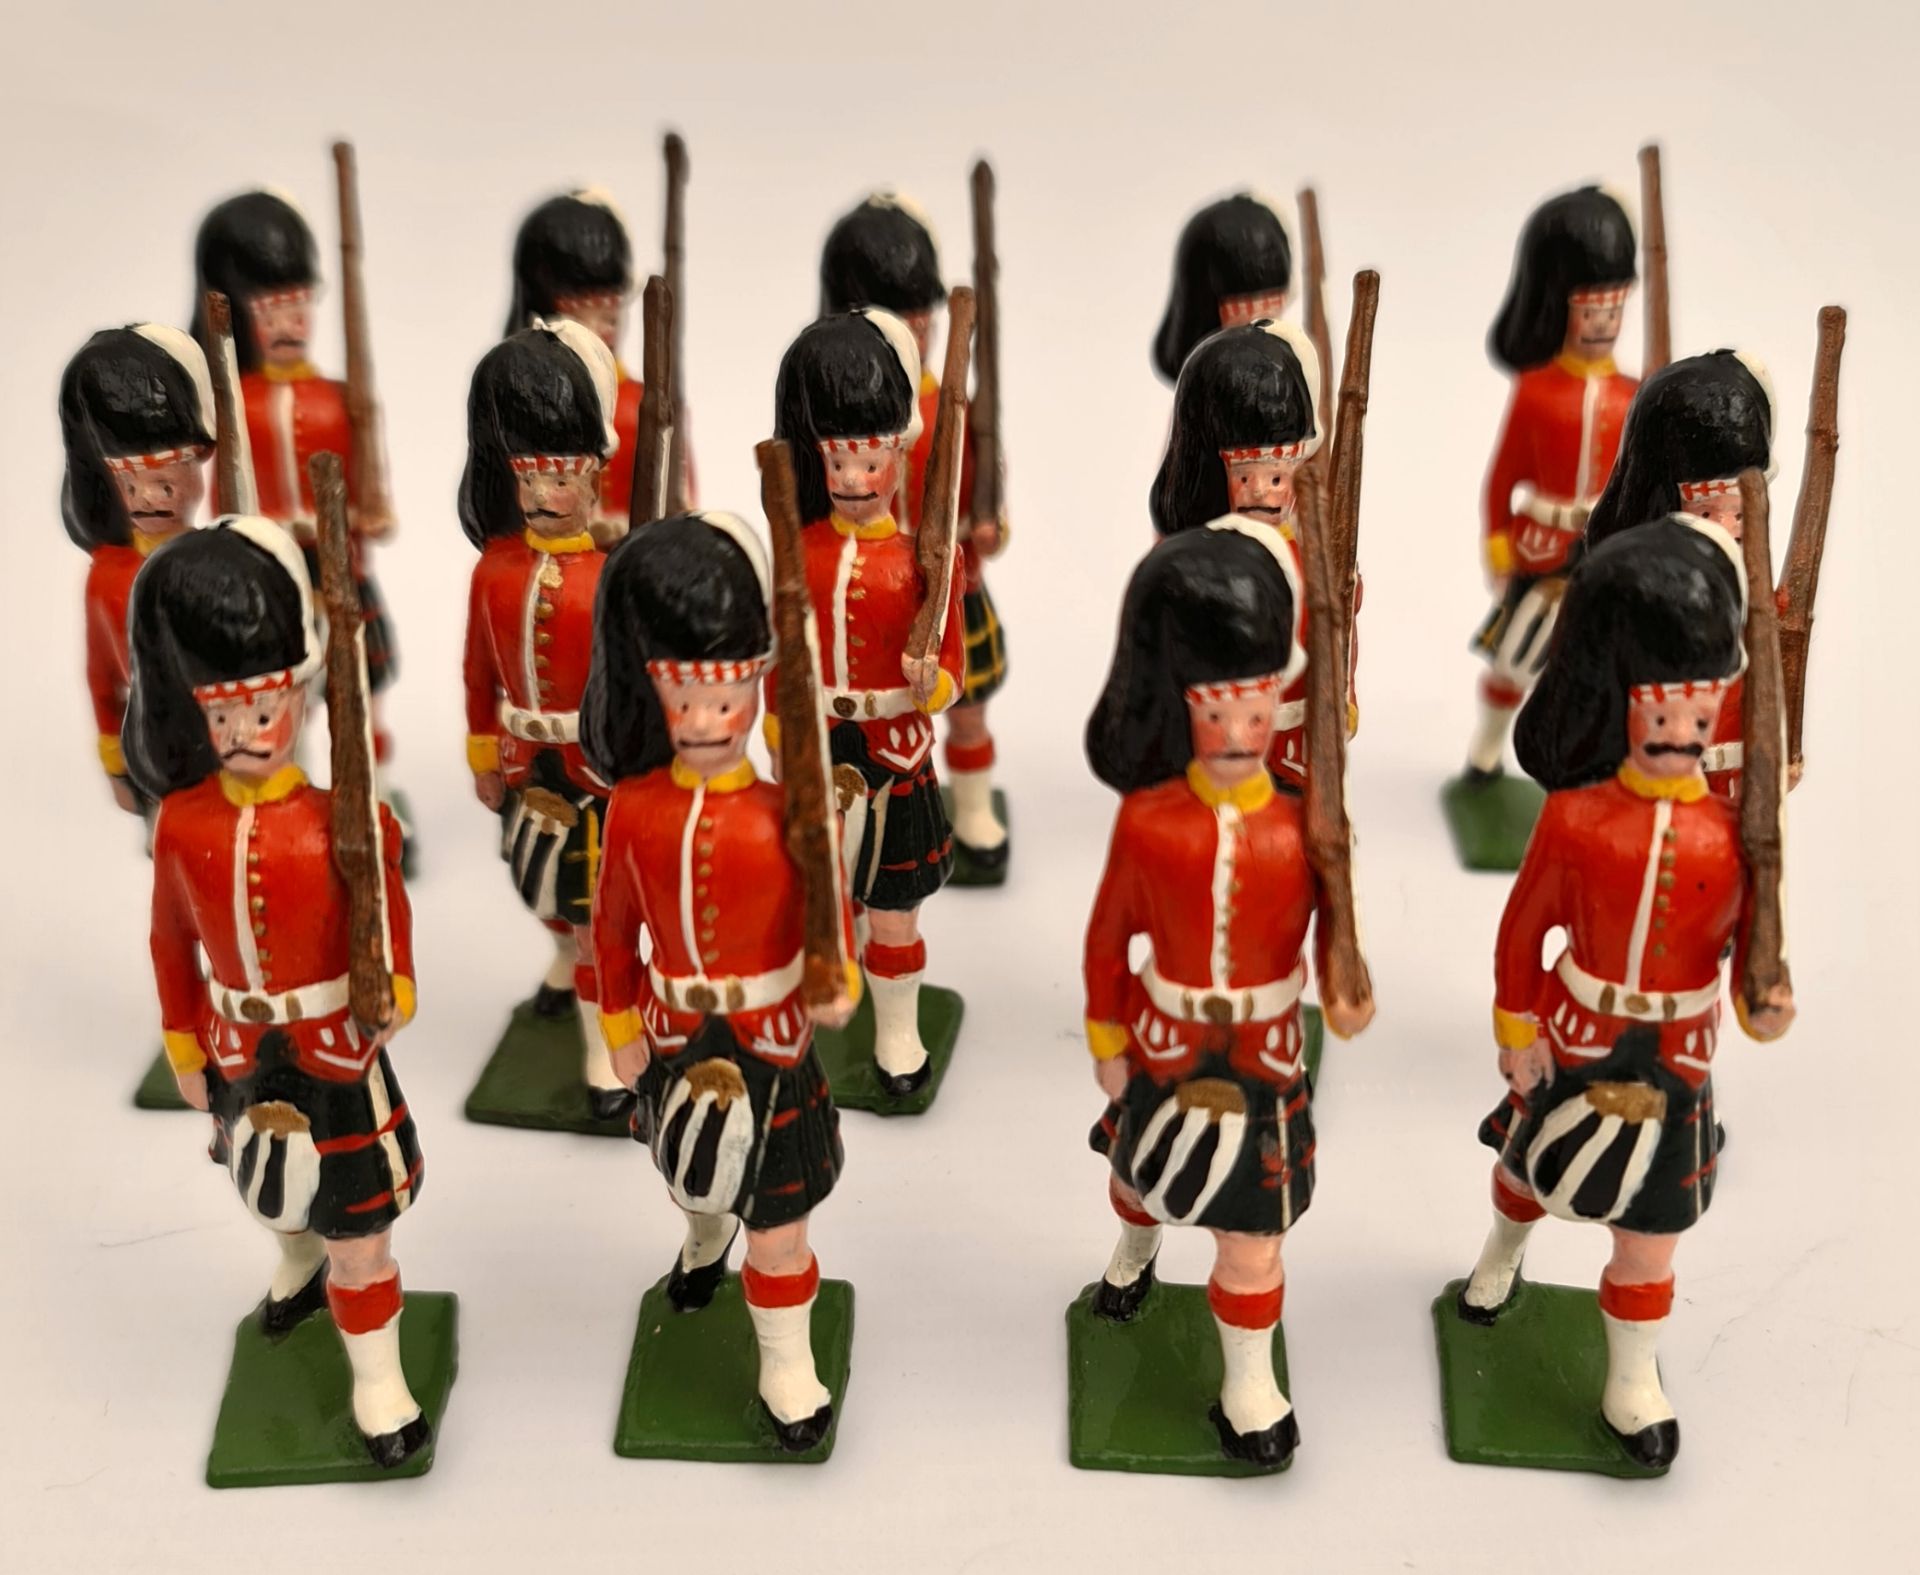 Vintage 13 Britain's Style Cast Metal Toy Soldiers 6cm Tall